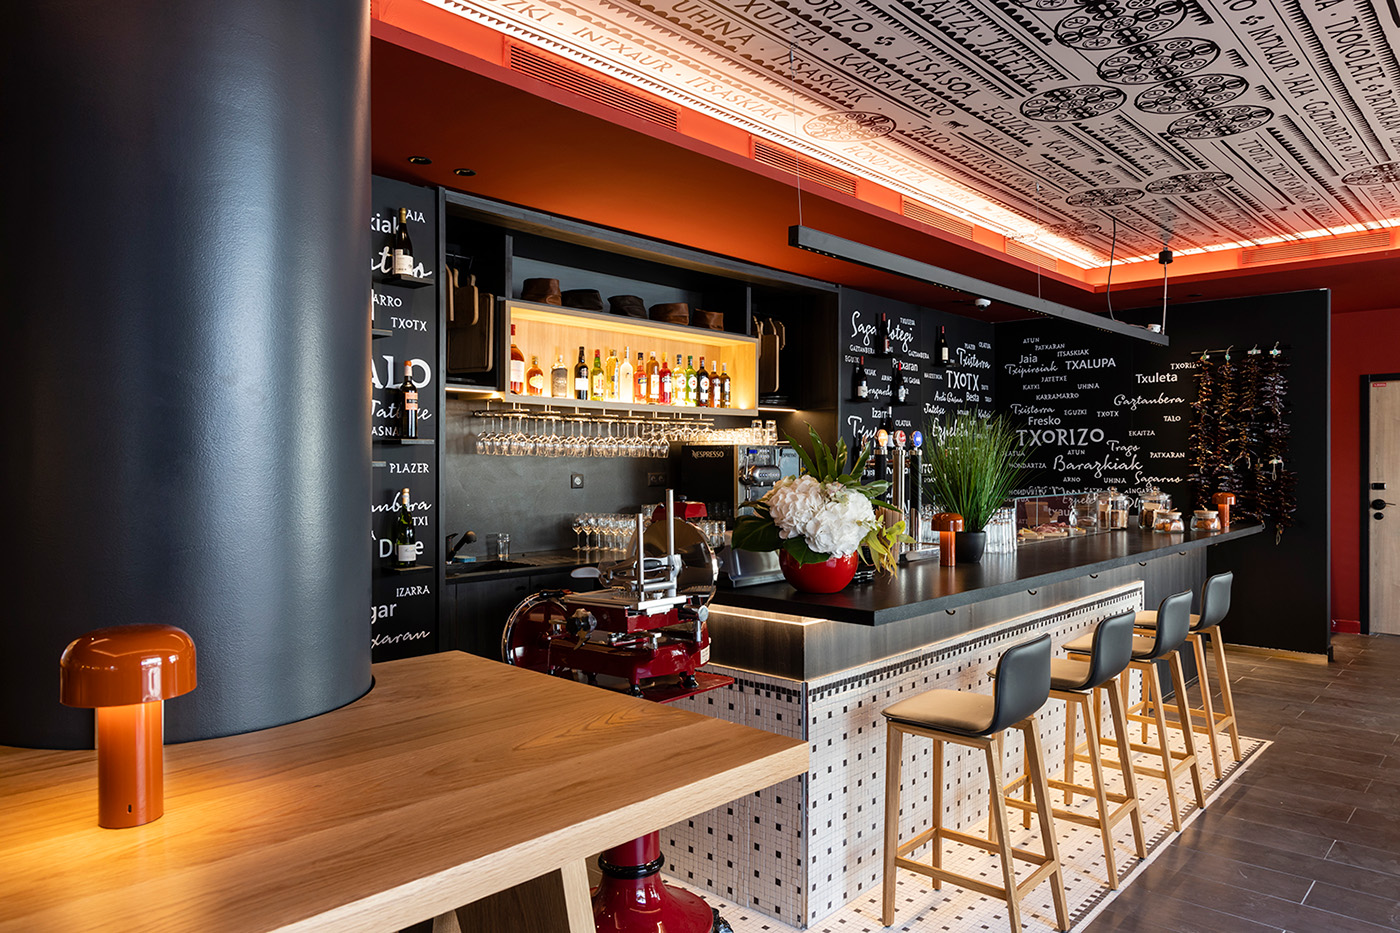 Basque bar of the helianthal hotel and spa in Saint Jean de Luz, 4 star lifestyle hotel, seaside hotel designed by the interior design studio jean-philippe nuel, basque country decoration